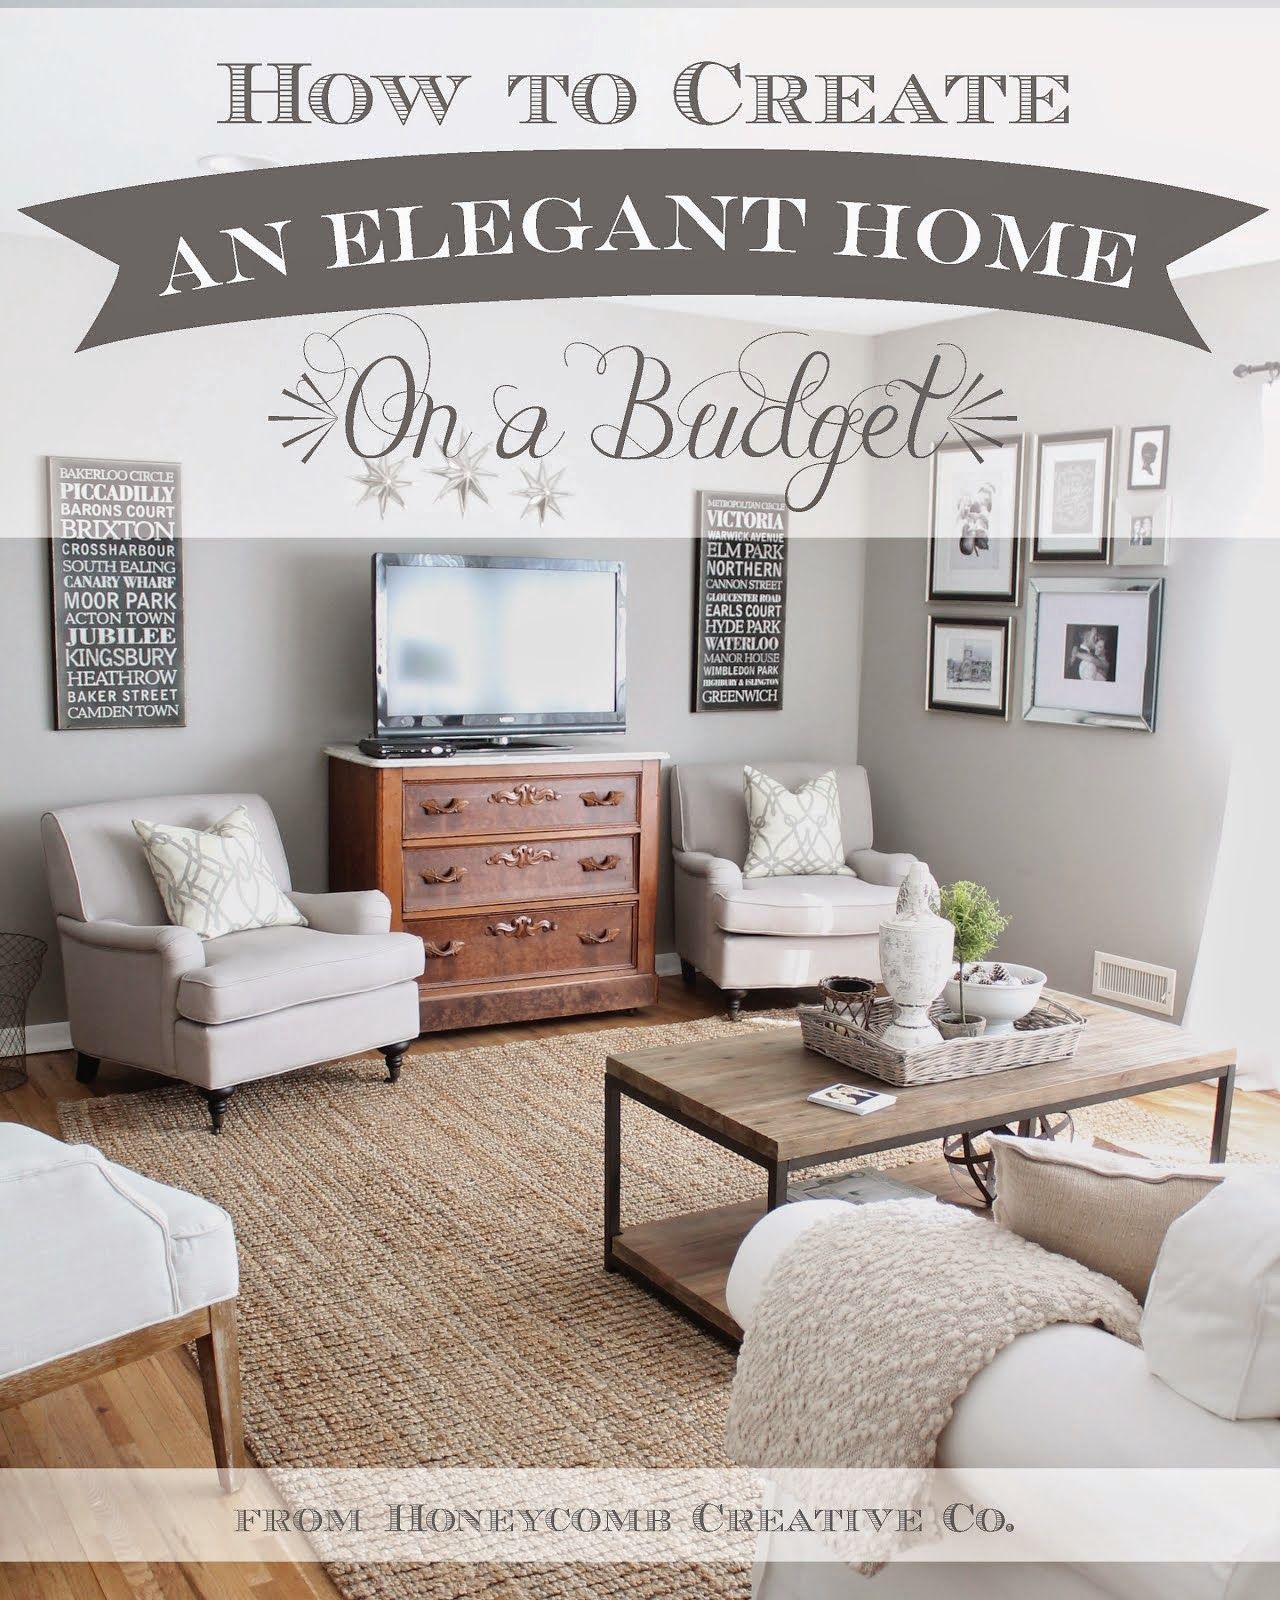 7 Tips for How to Create an Elegant Home on a Budget